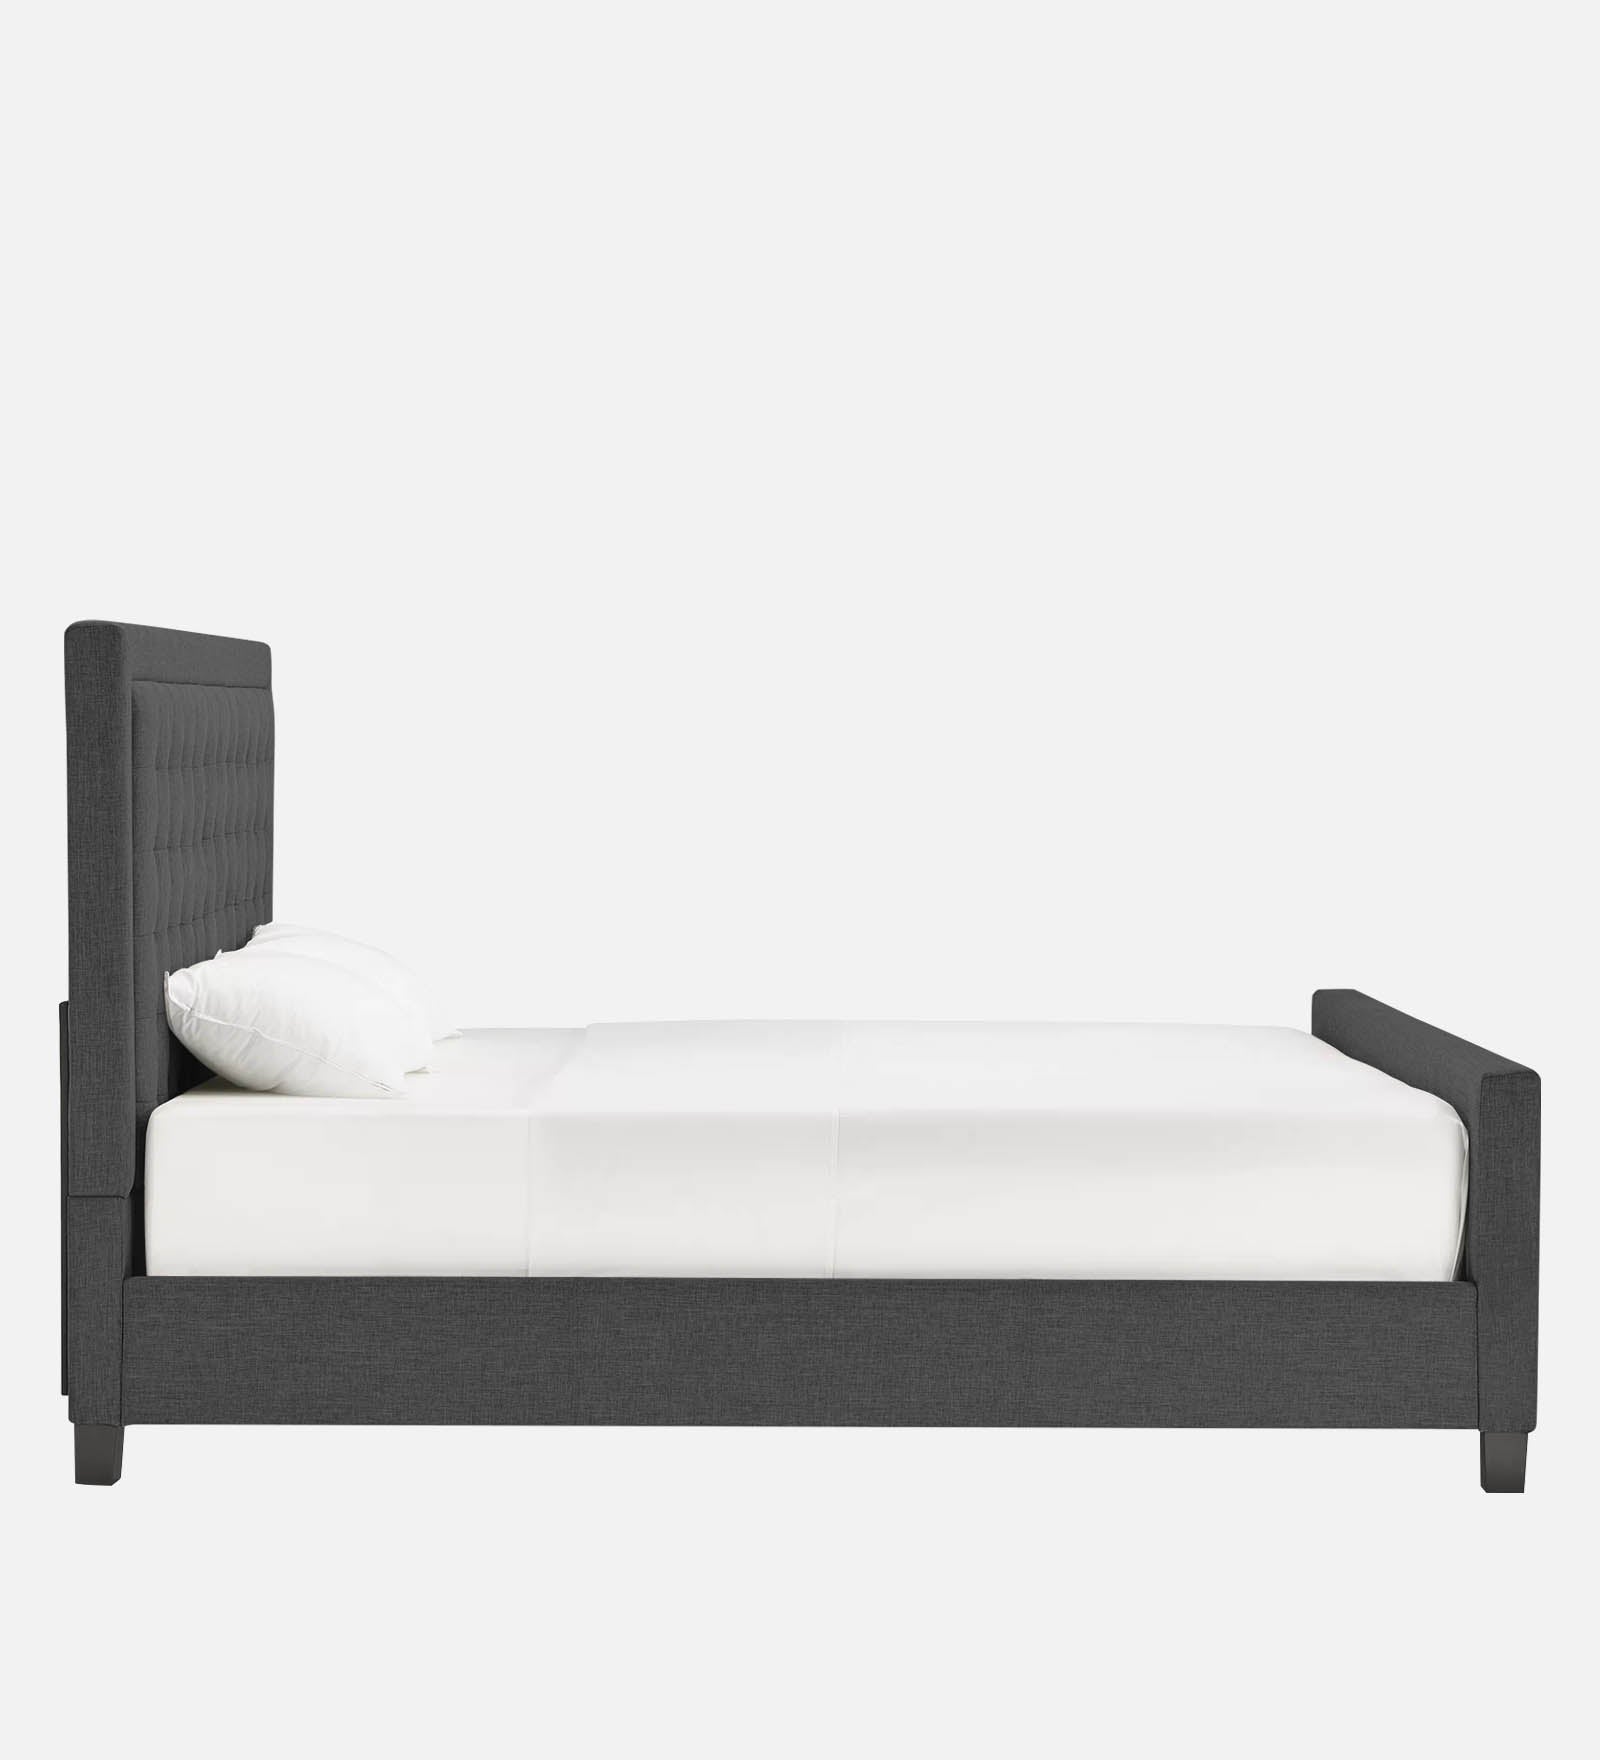 Kaster Fabric King Size Bed In Charcoal Grey Colour